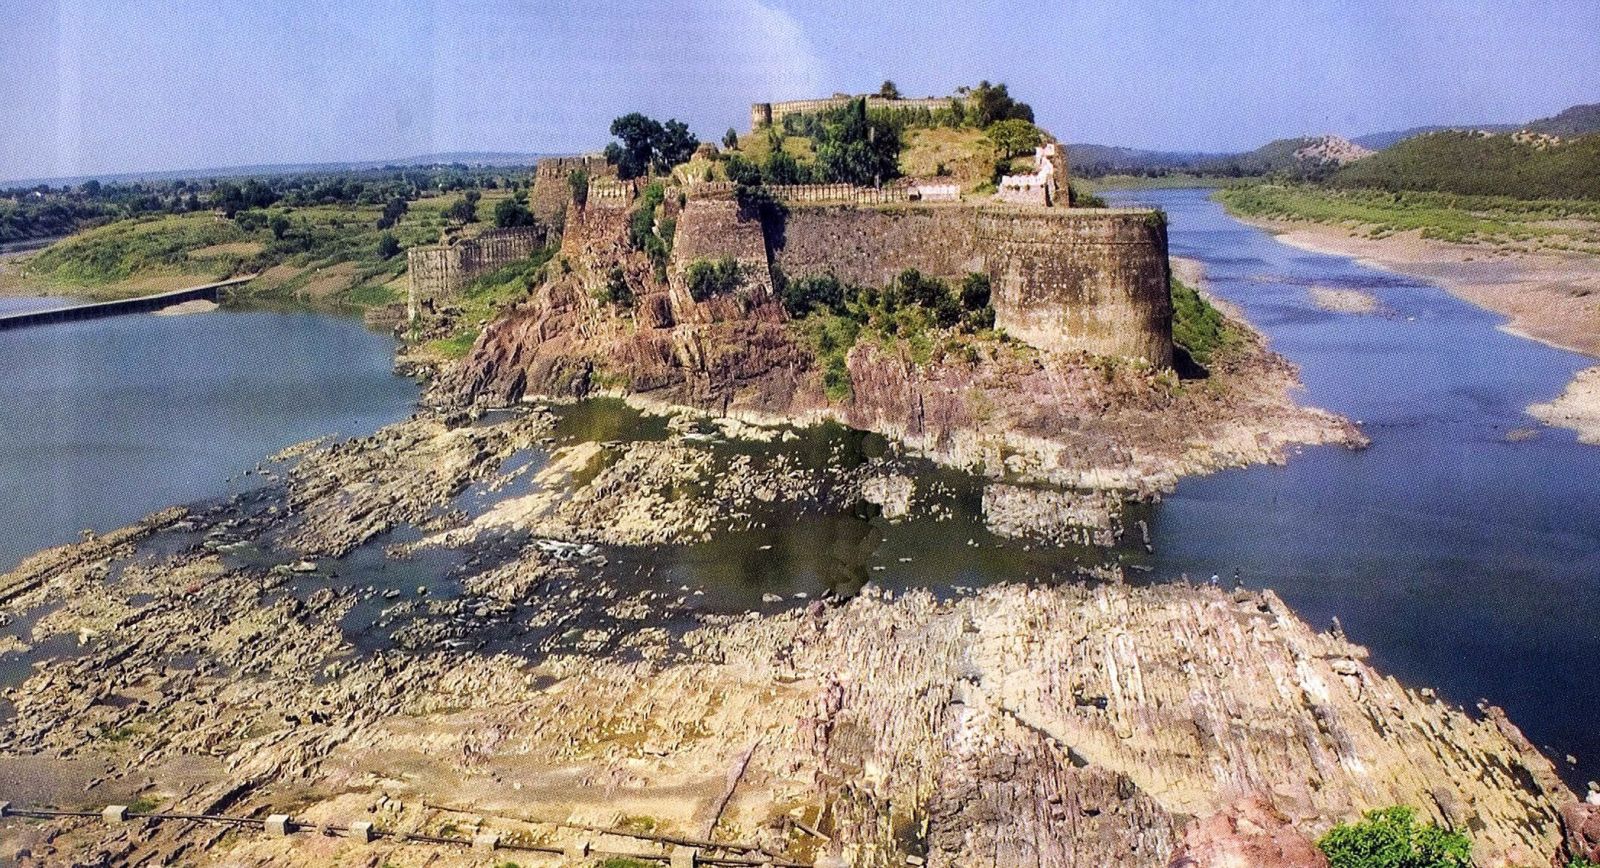 The Gagron Fort